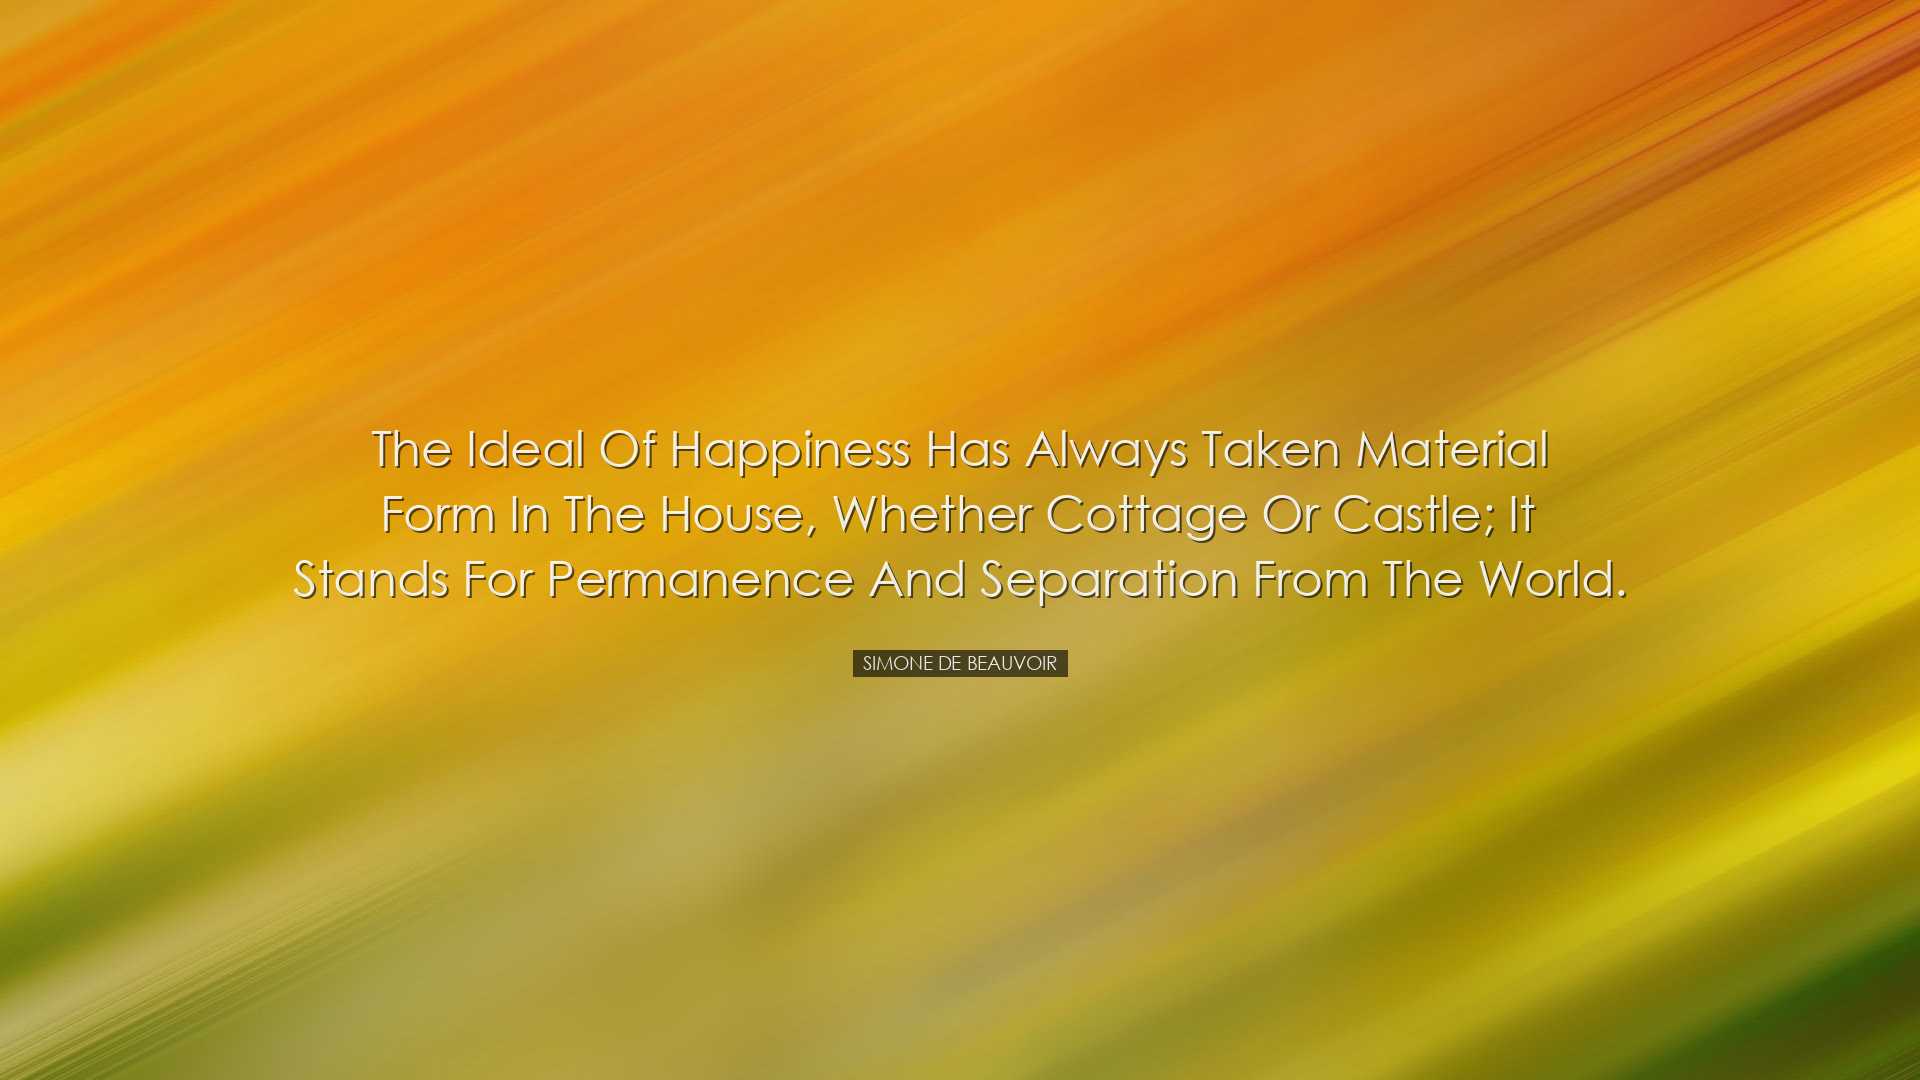 The ideal of happiness has always taken material form in the house